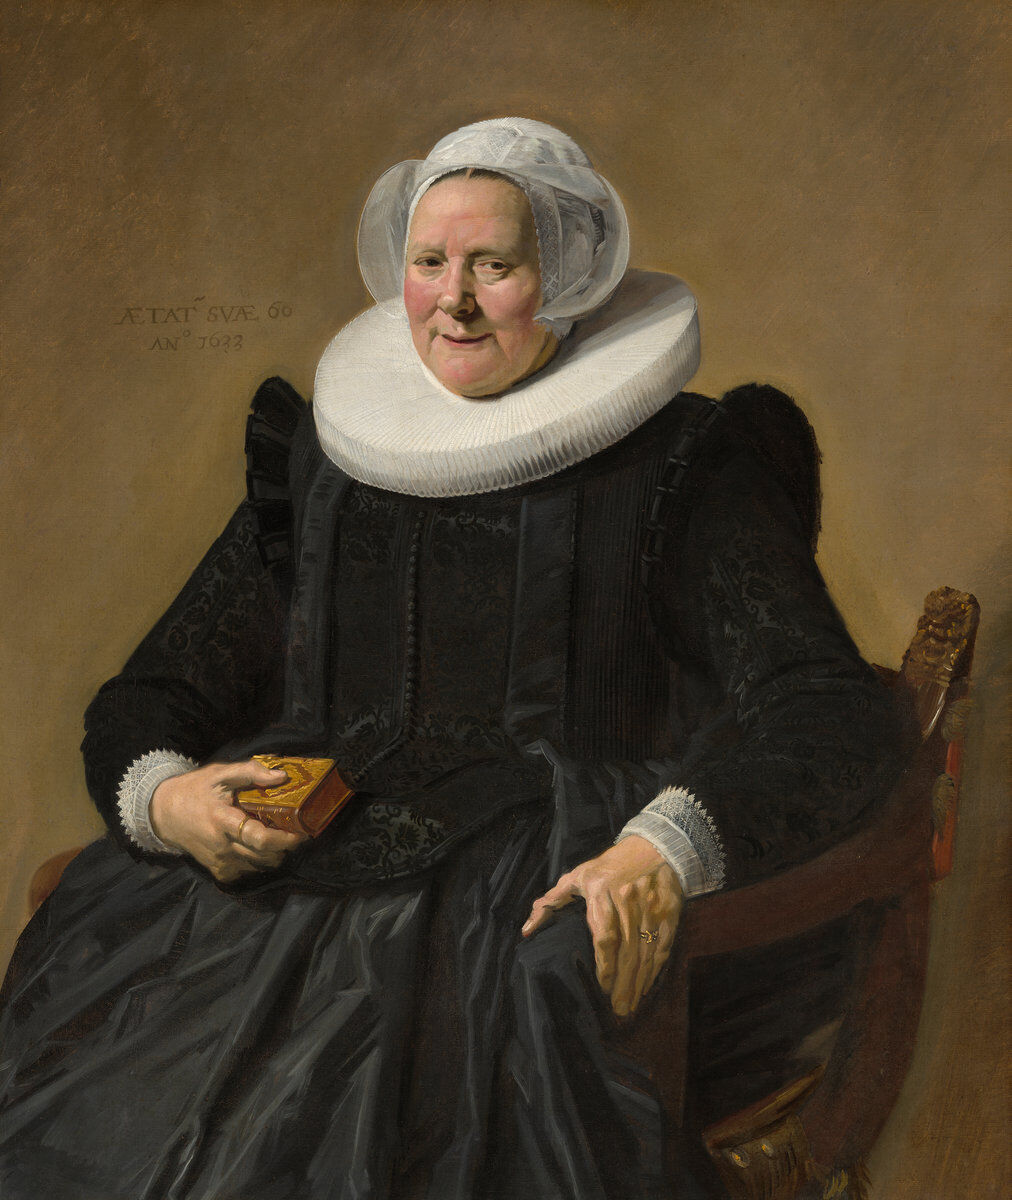 Frans Hals, Portrait of an Elderly Lady, 1633. Courtesy of the National Gallery of Art.